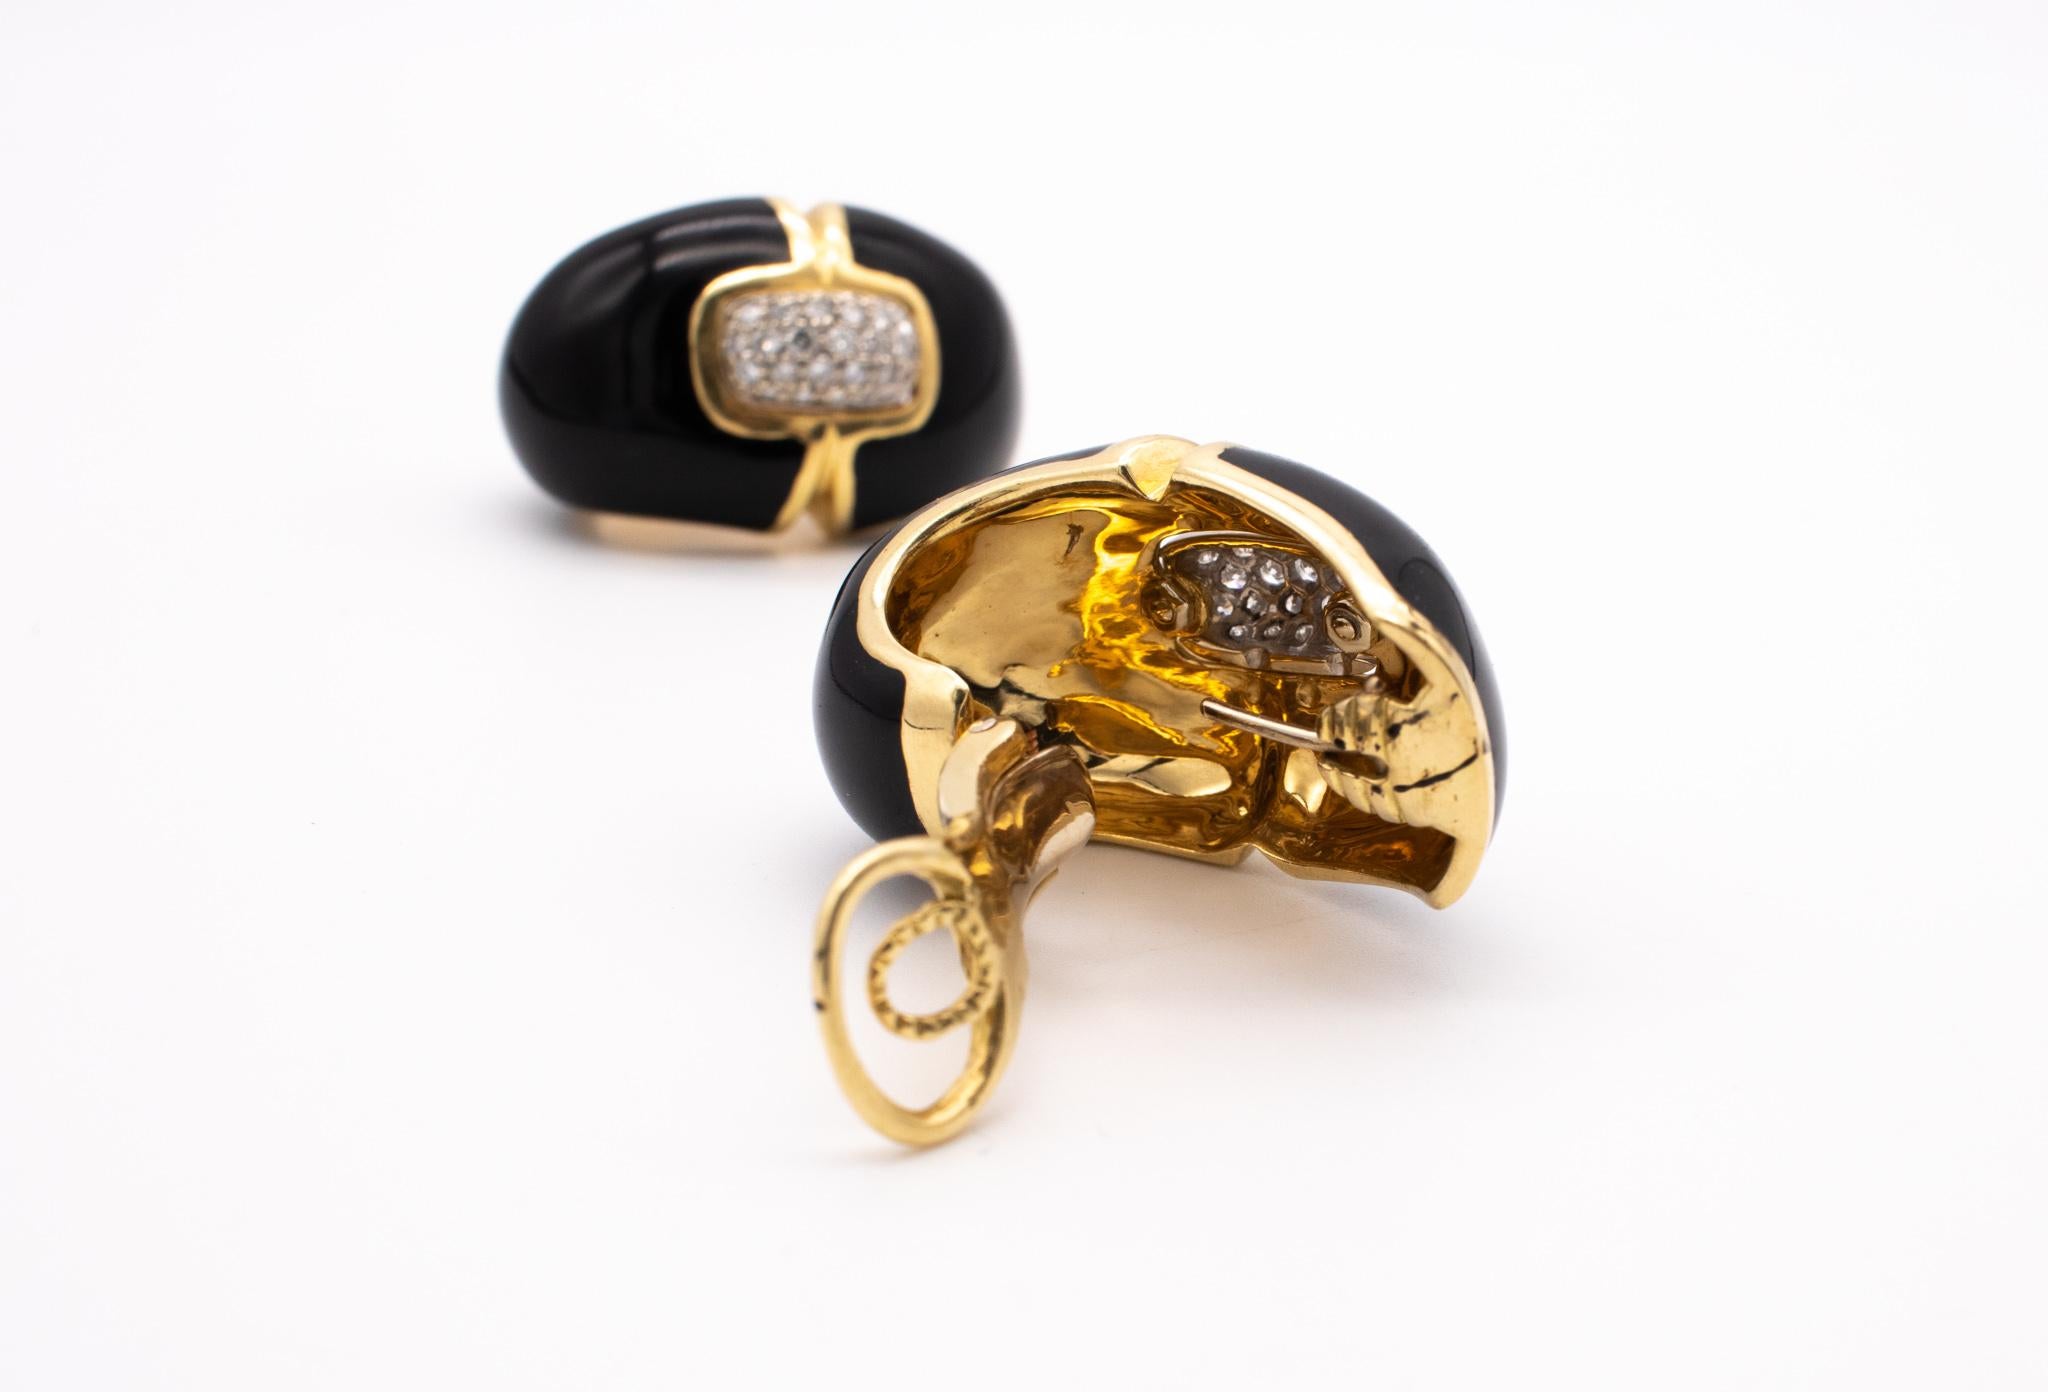 Roberto Legnazzi 1970 Earrings 18Kt Gold With Black Enamel And 1.16 Ctw Diamonds In Excellent Condition For Sale In Miami, FL